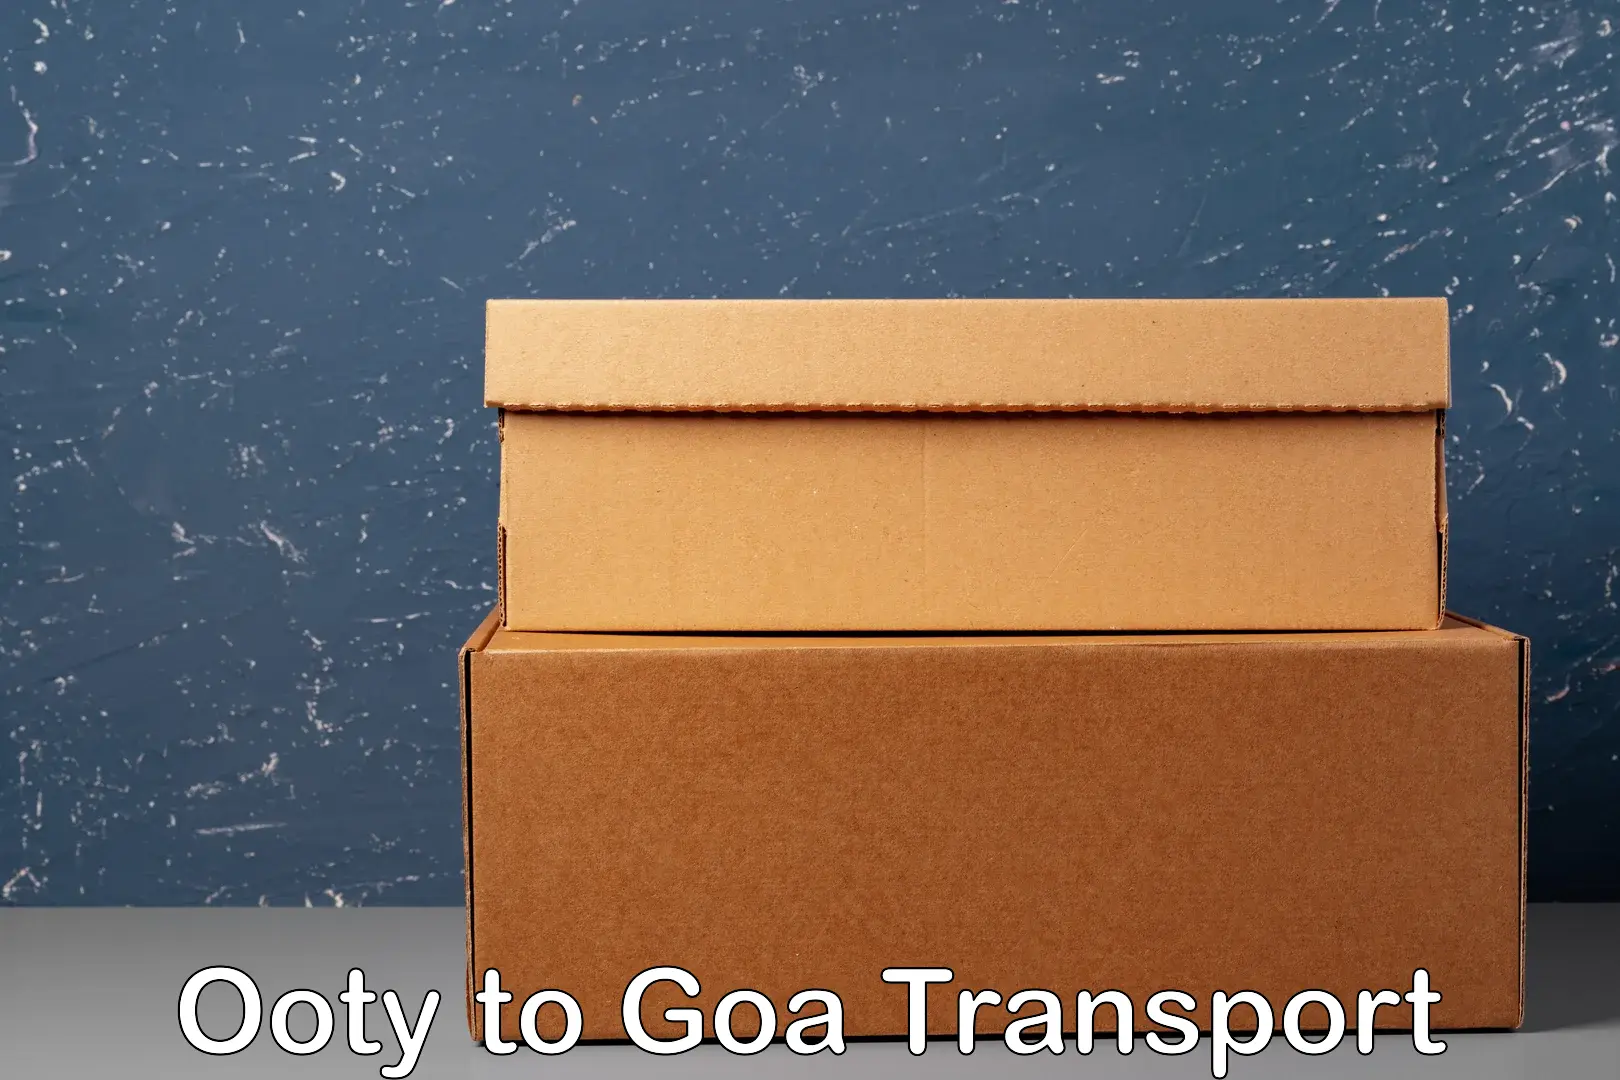 Scooty transport charges Ooty to IIT Goa